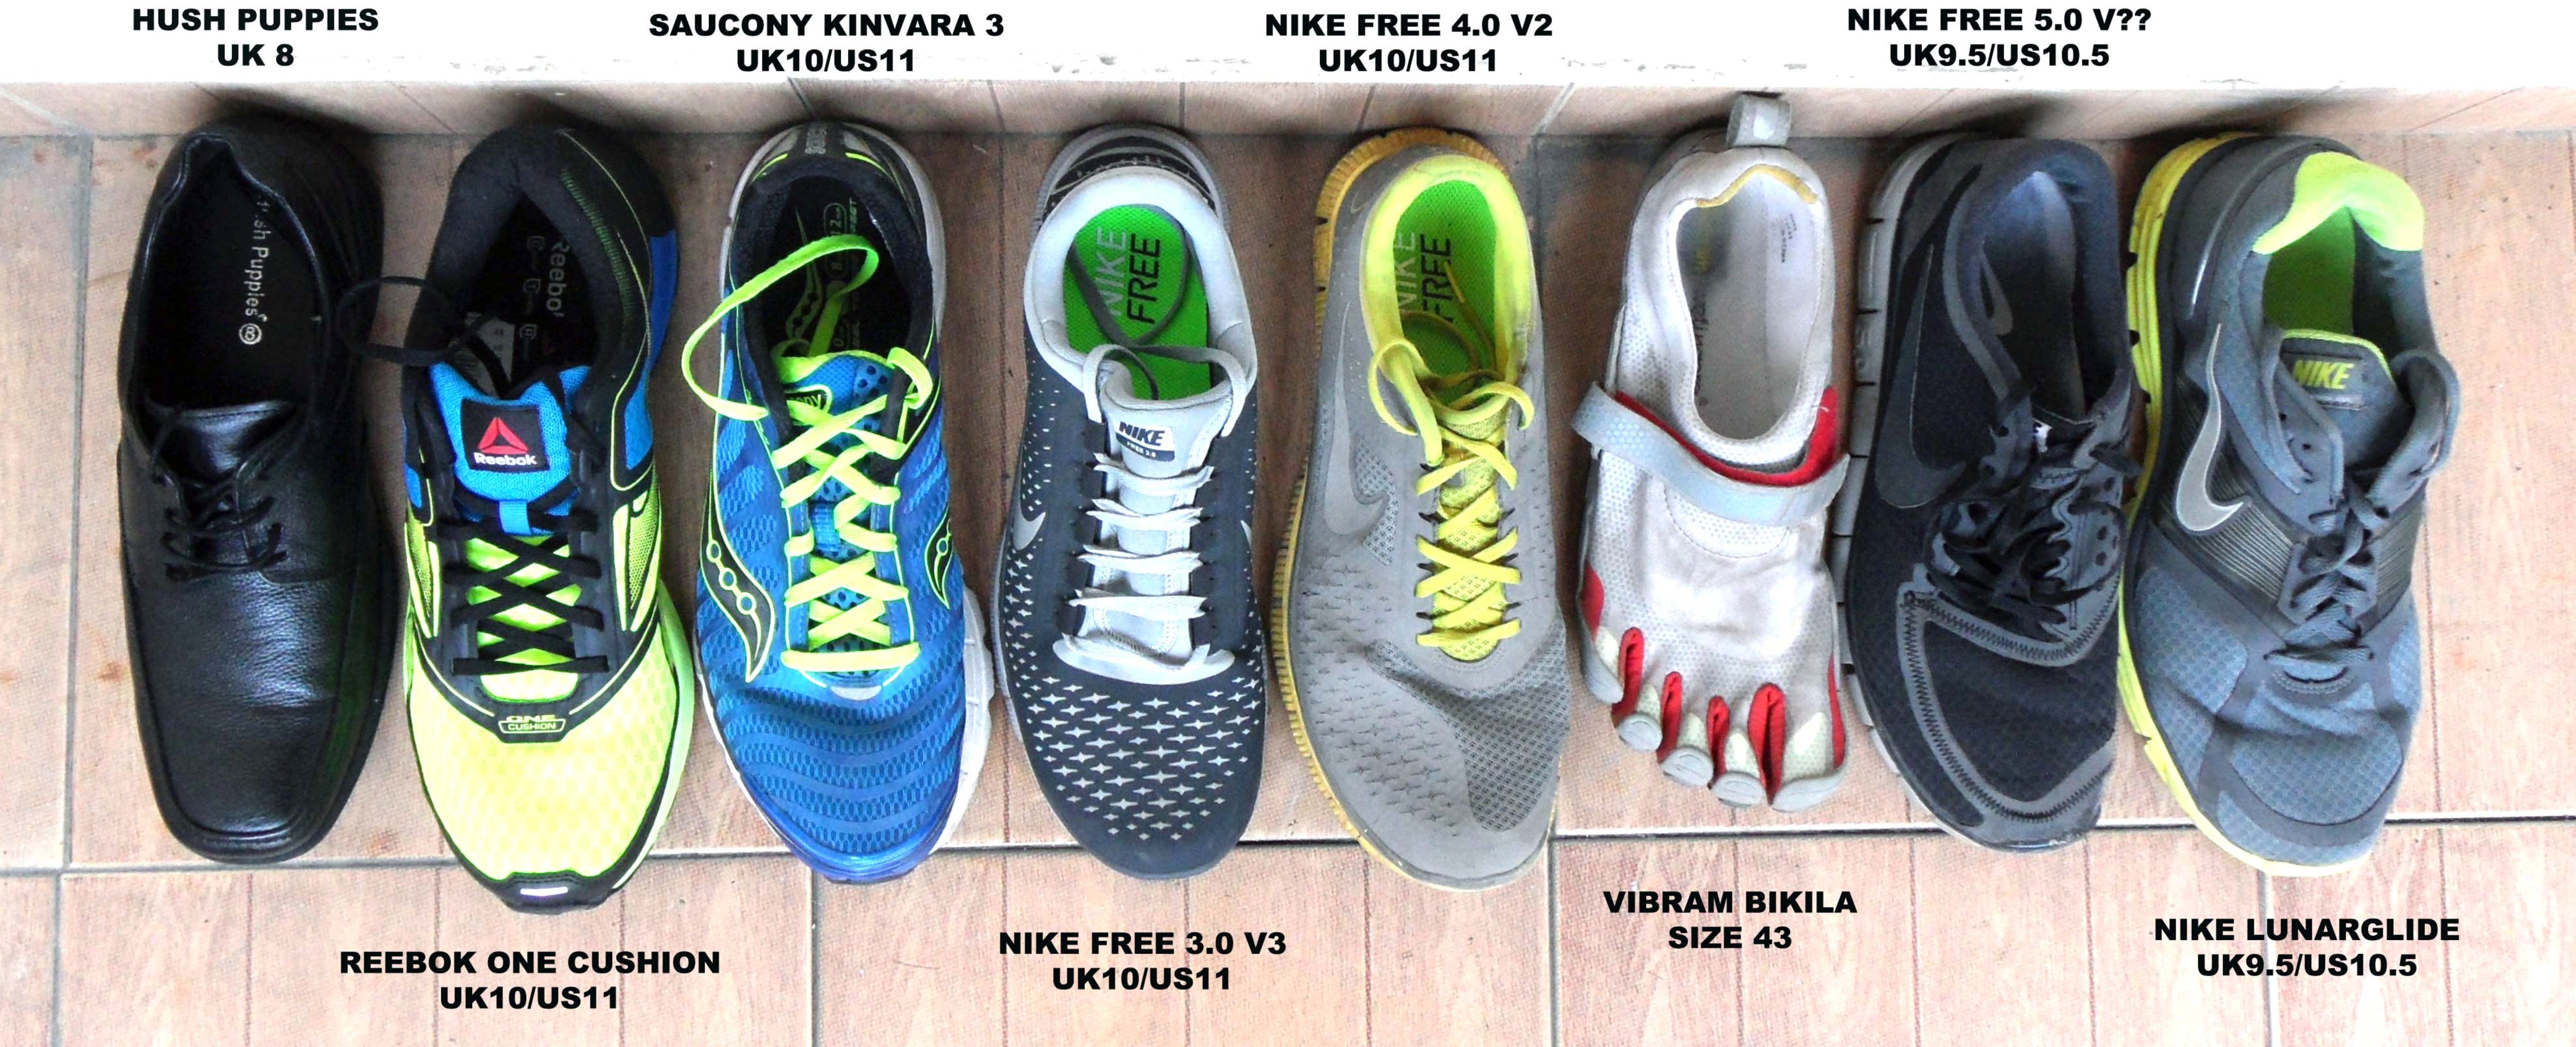 saucony sizing compared to nike